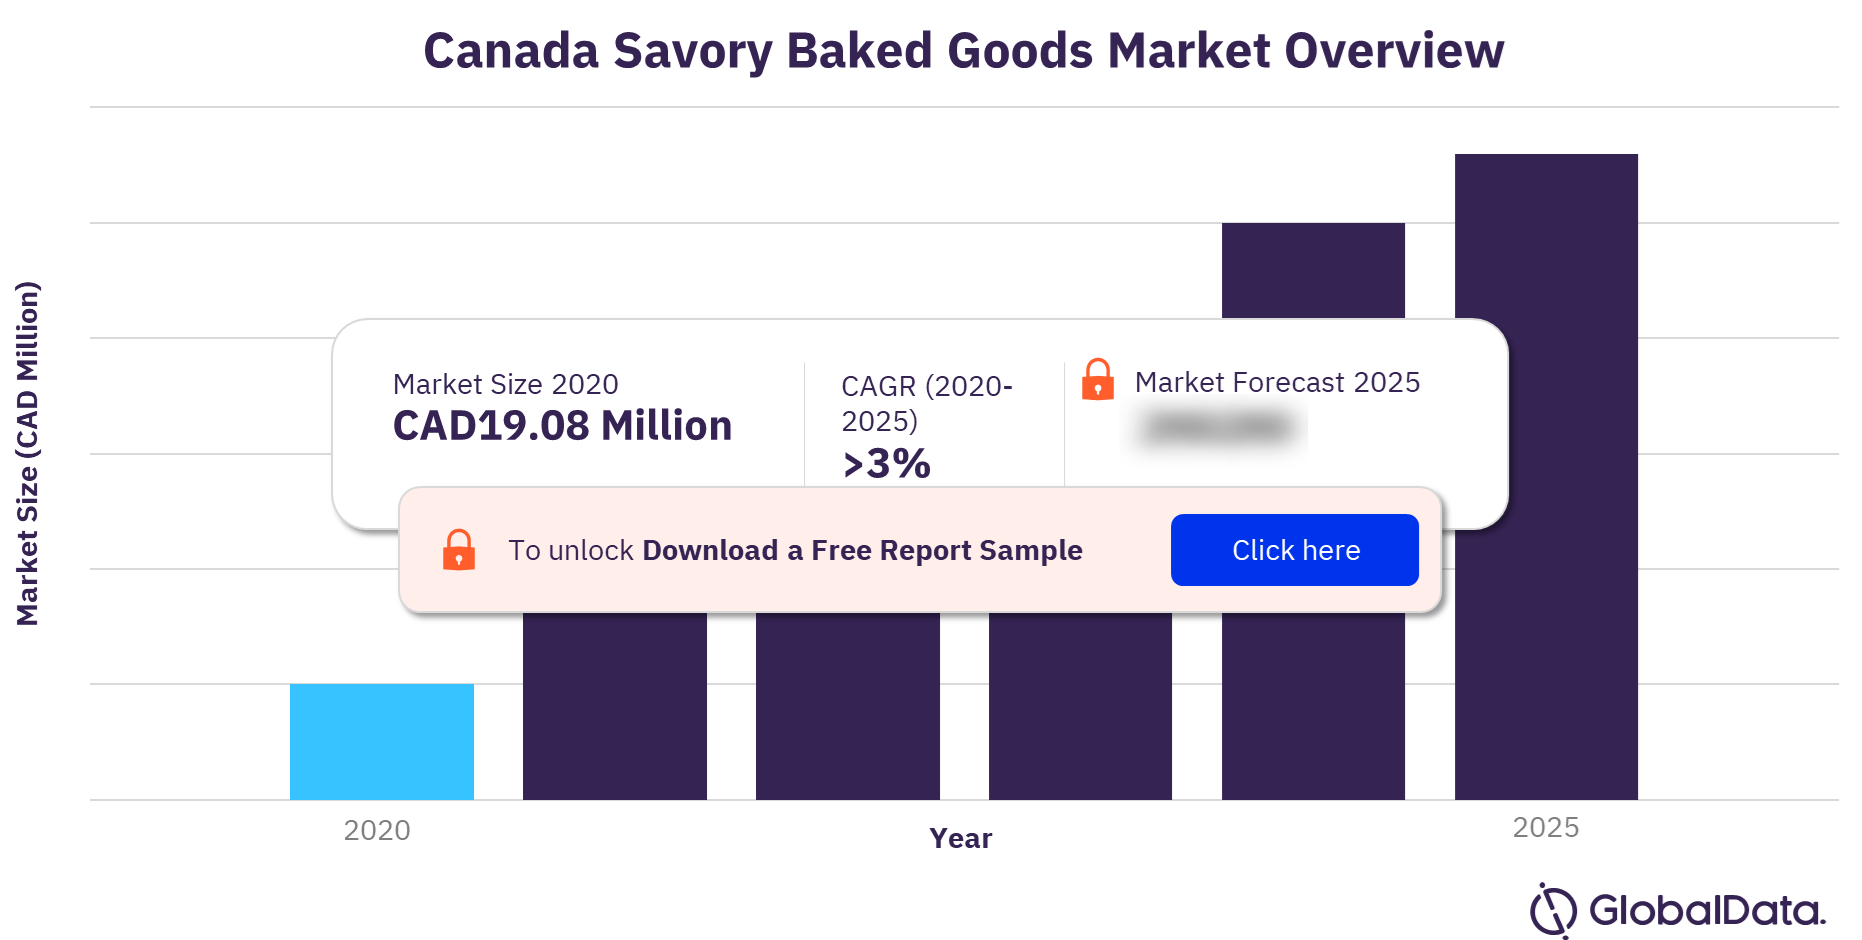 Canada savory baked goods market outlook 